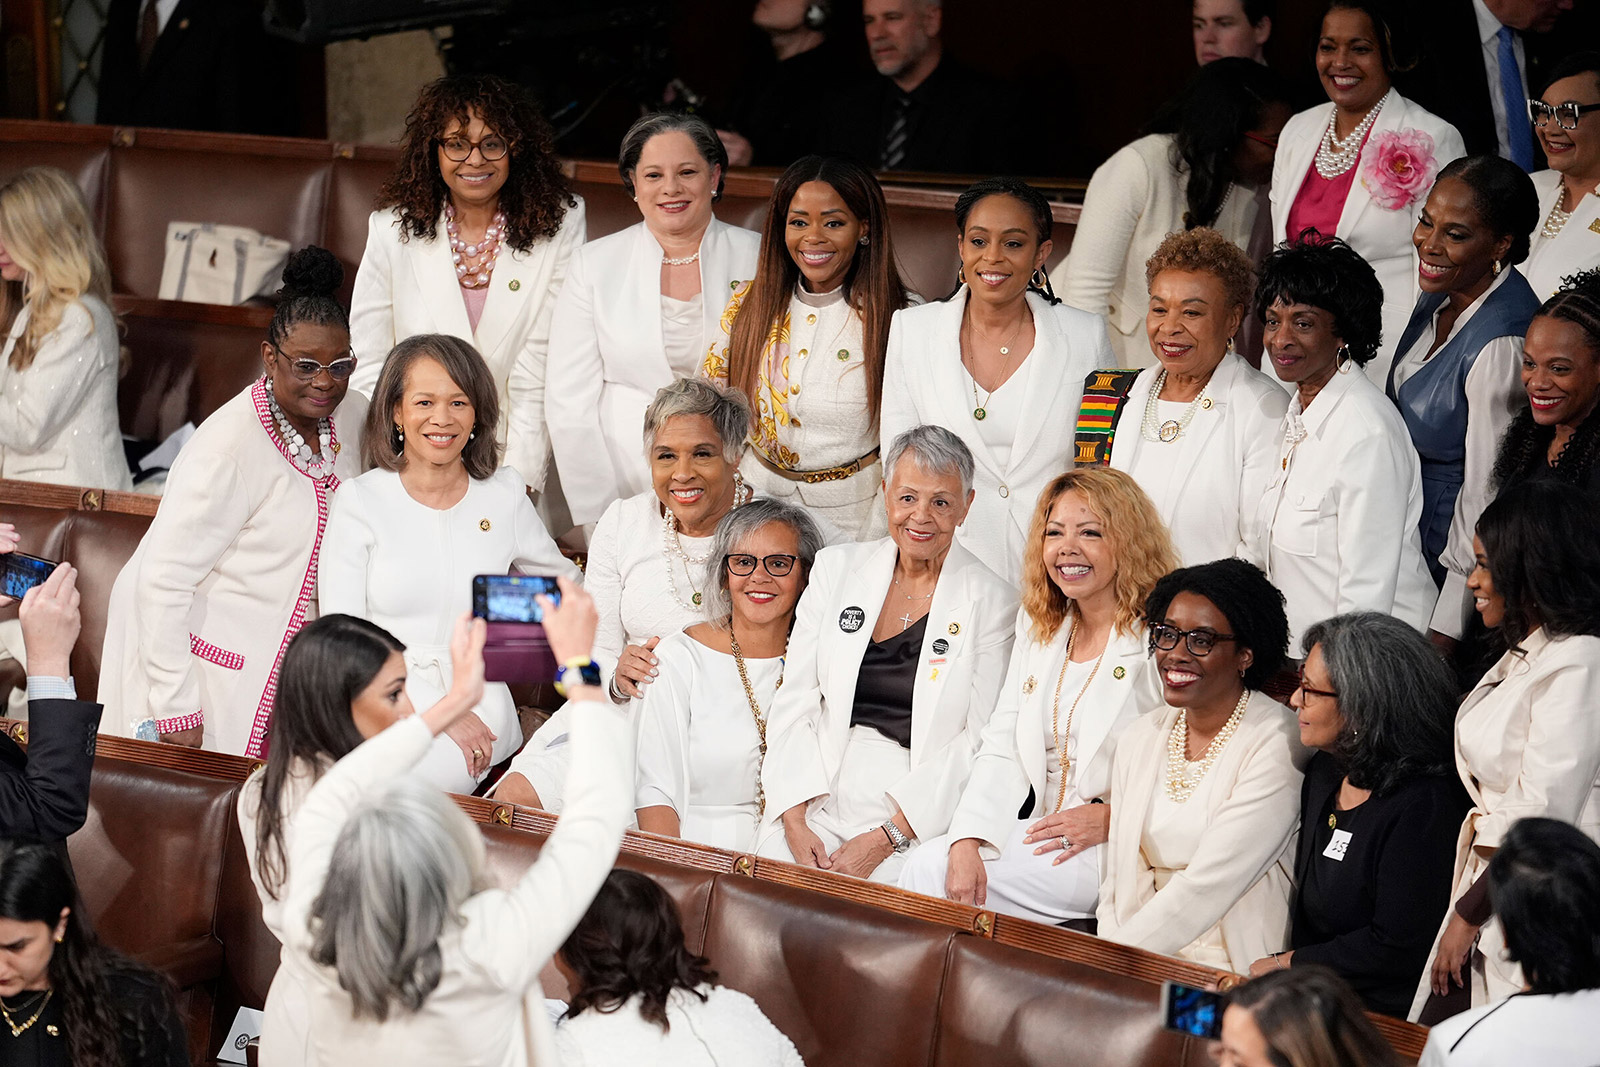 Members of the Democratic caucus wear white for woman's rights before Biden's address.